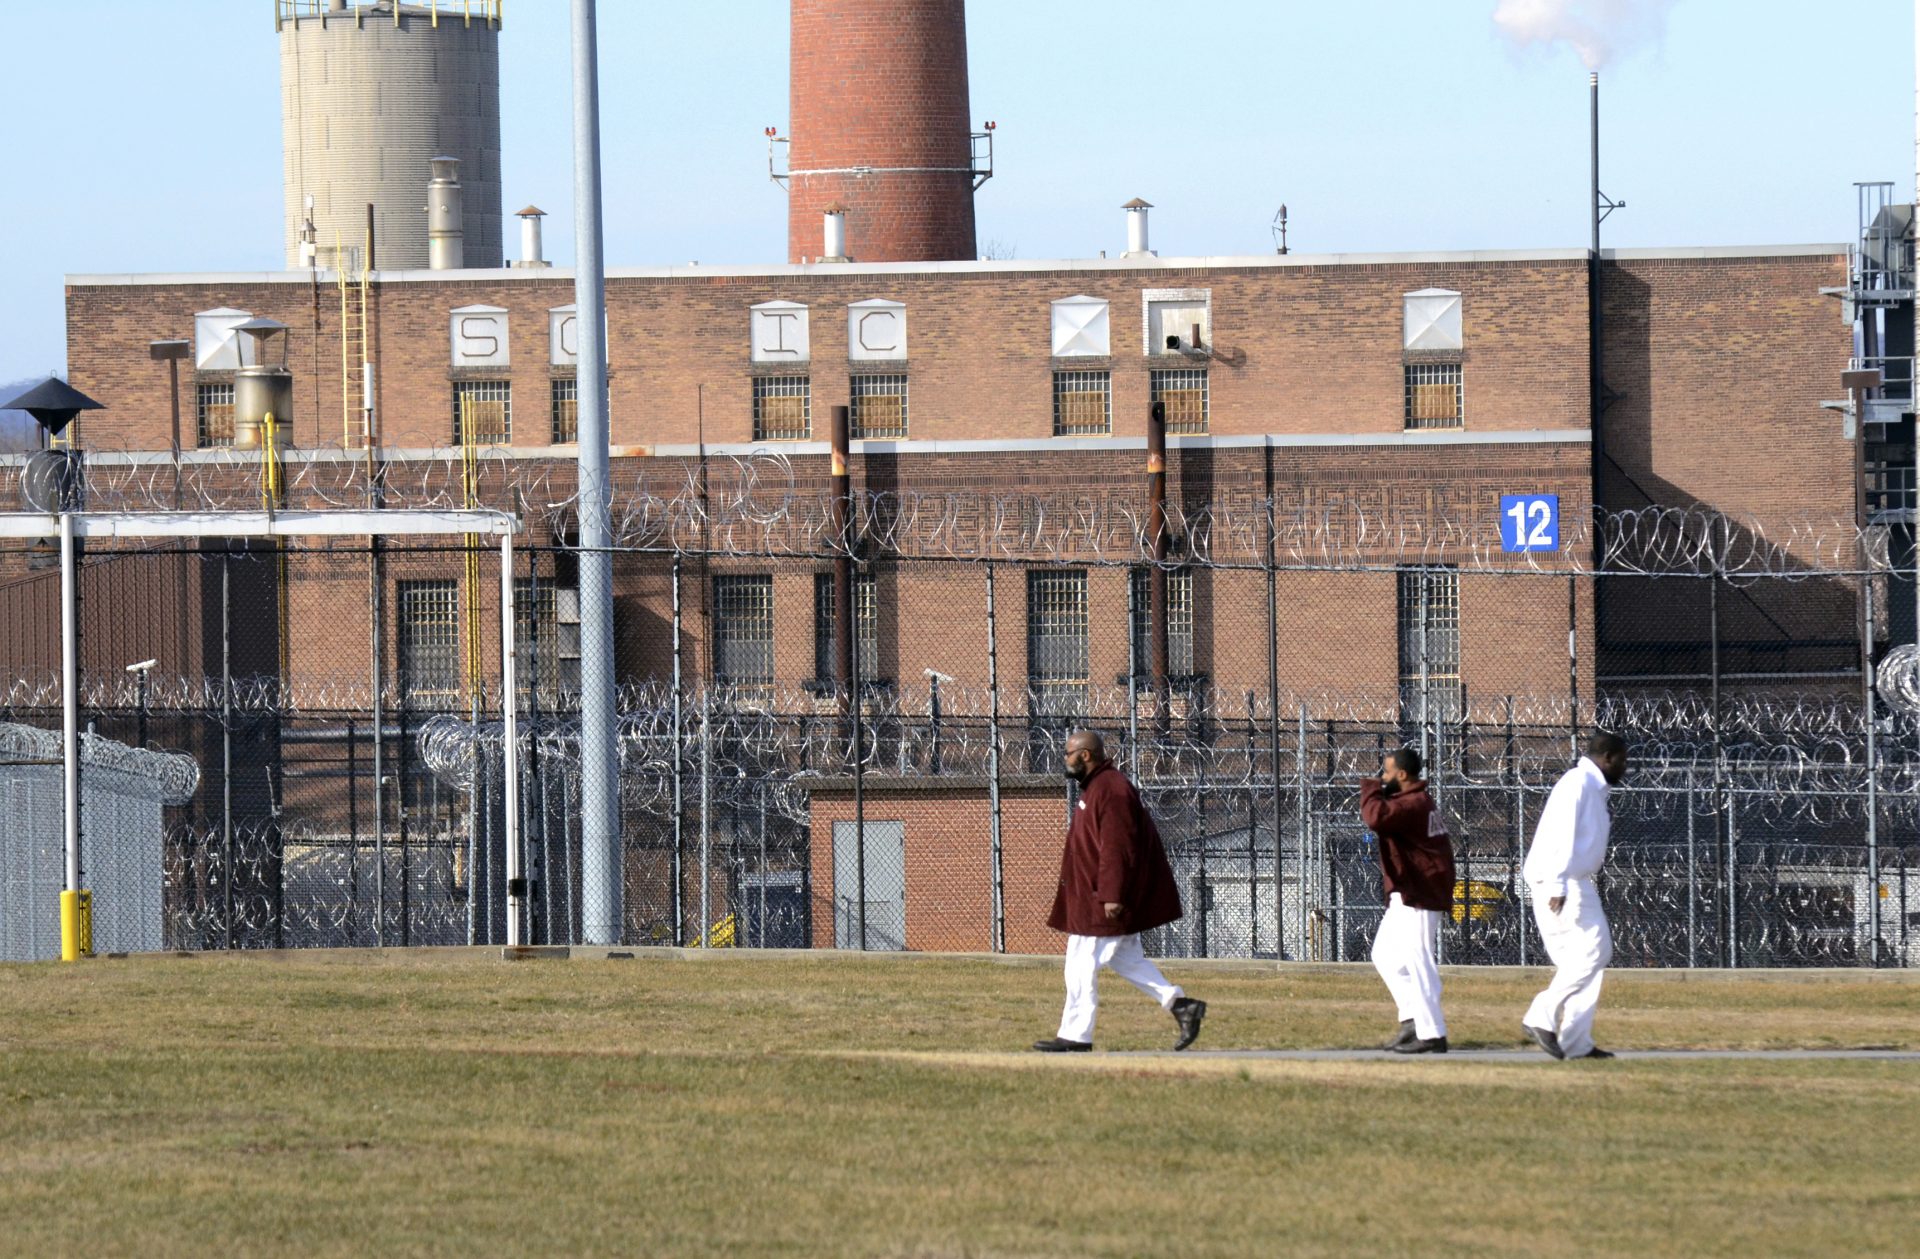 Inmates walk across a yard at the State Correctional Institution at Camp Hill, Pennsylvania, Friday, Jan. 13, 2017, in Camp Hill, Pa.